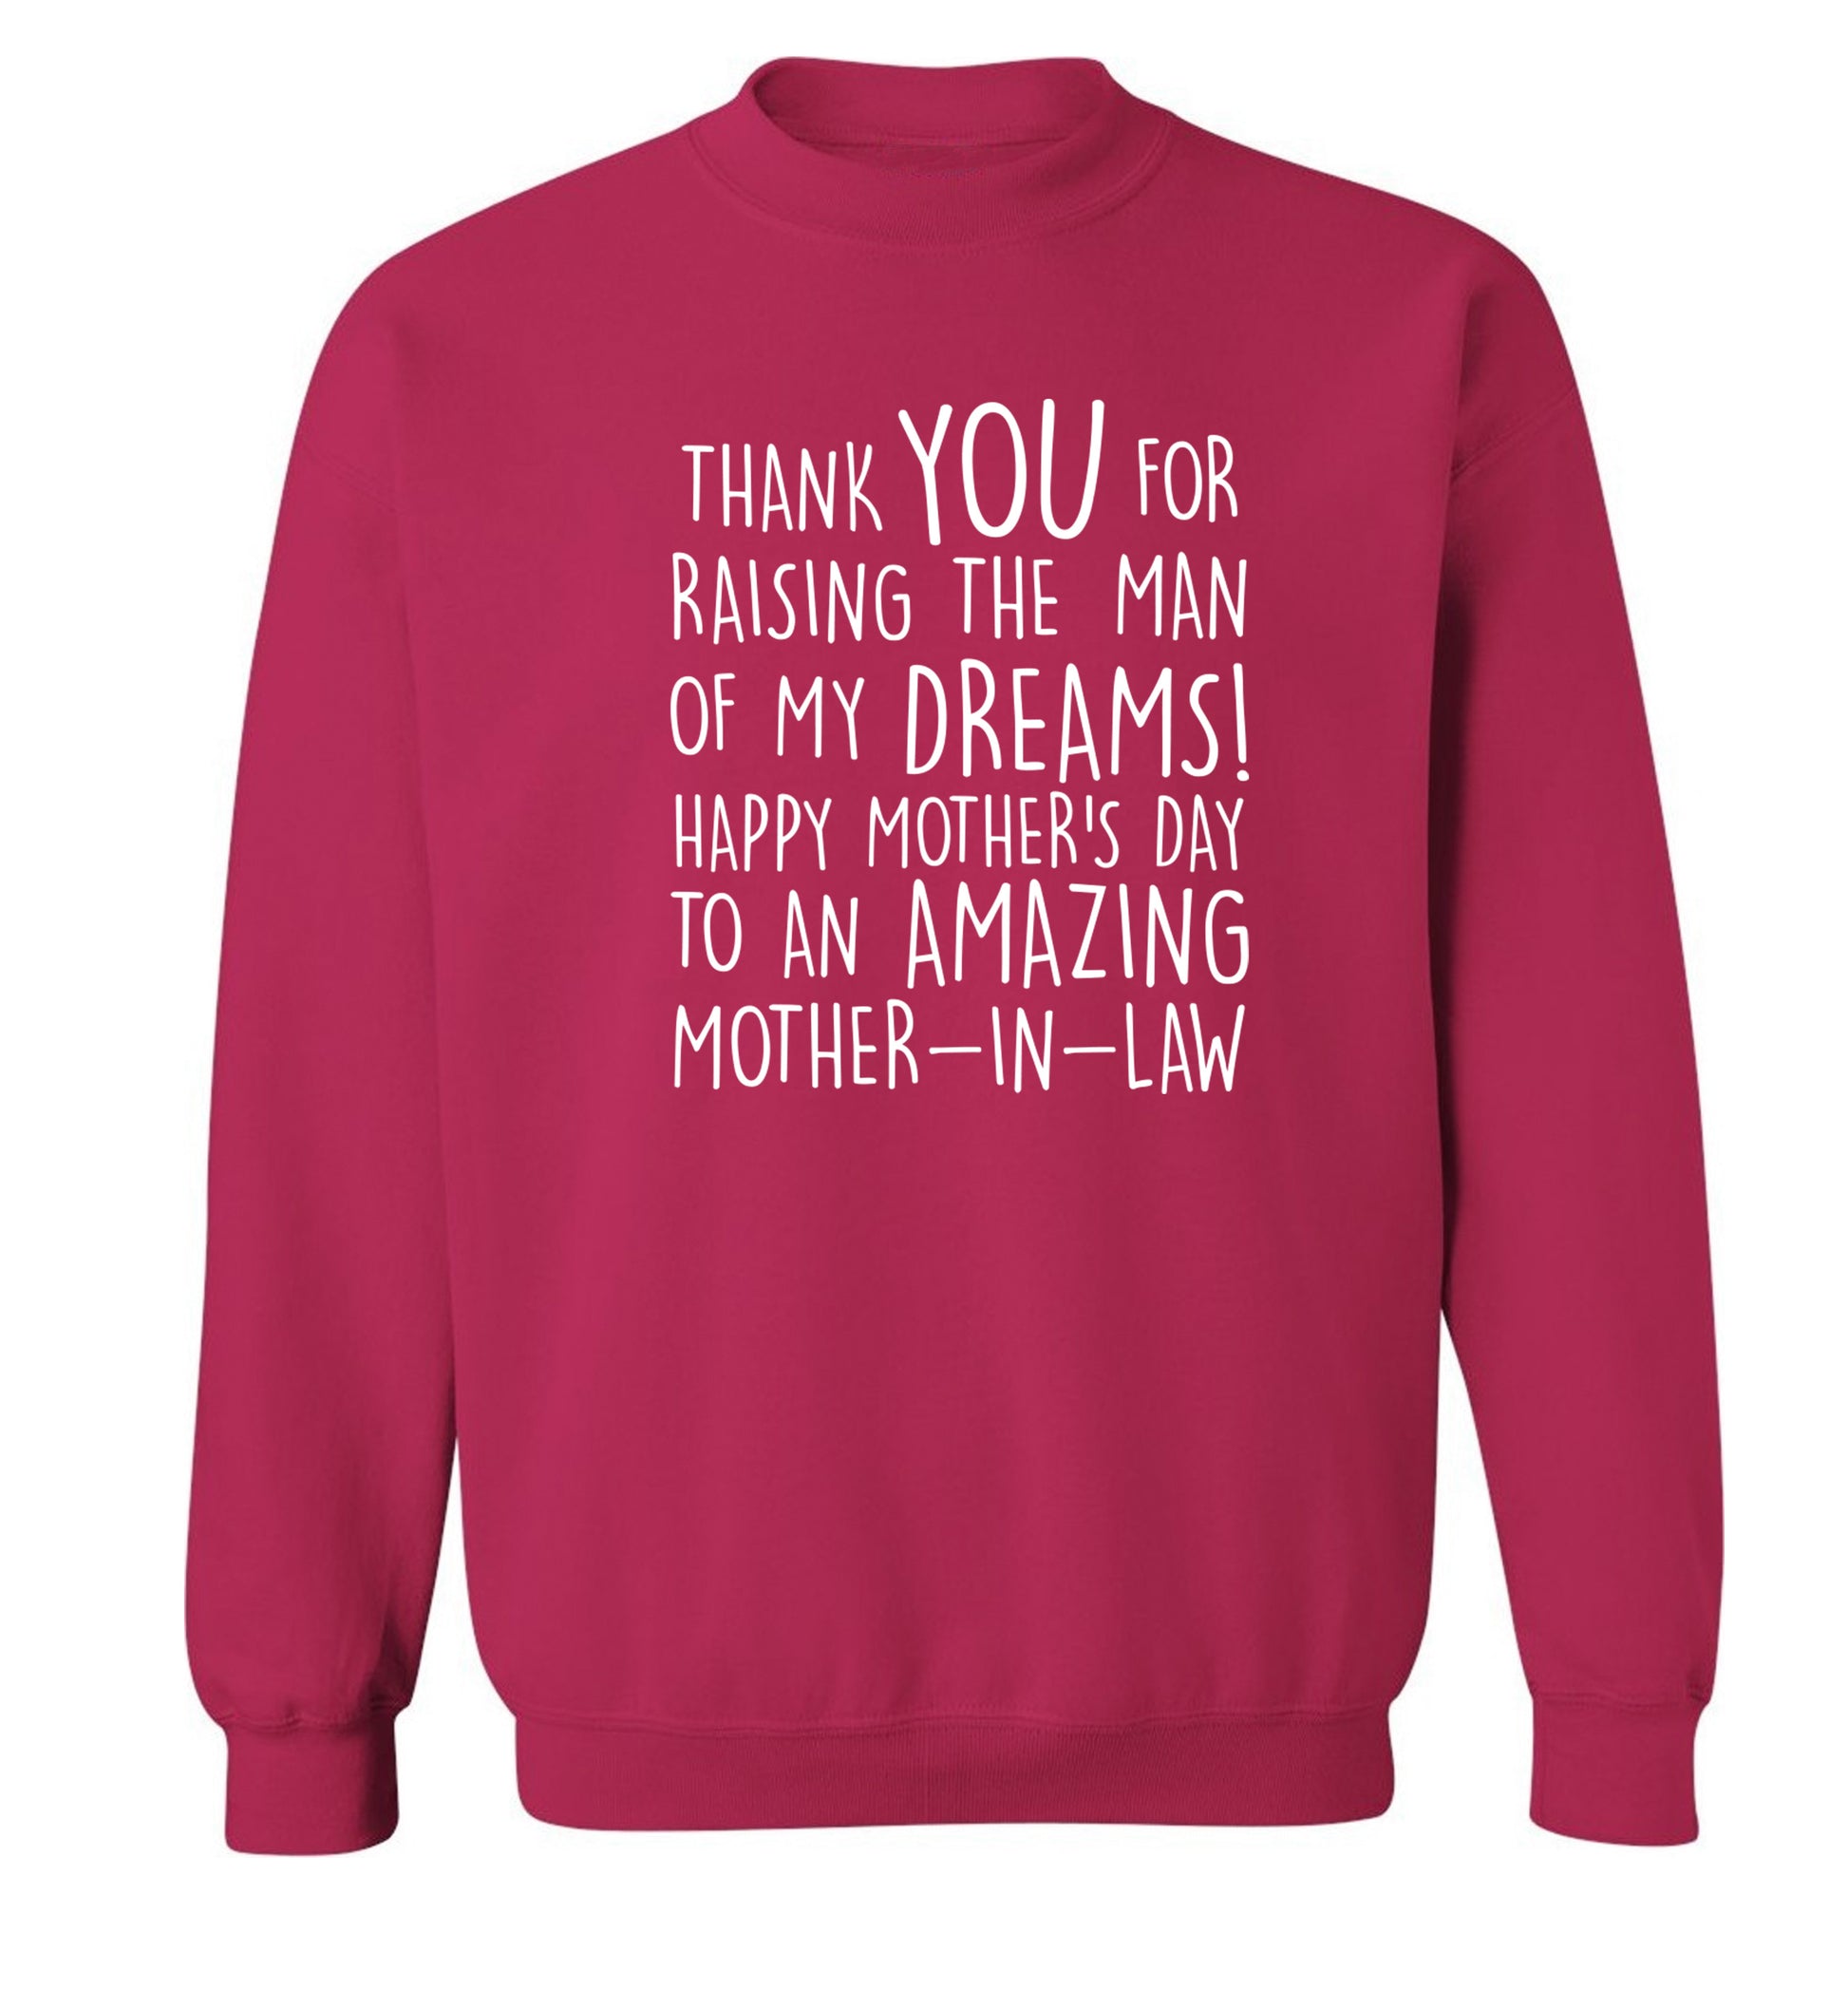 Thank you for raising the man of my dreams happy mother's day mother-in-law Adult's unisex pink Sweater 2XL